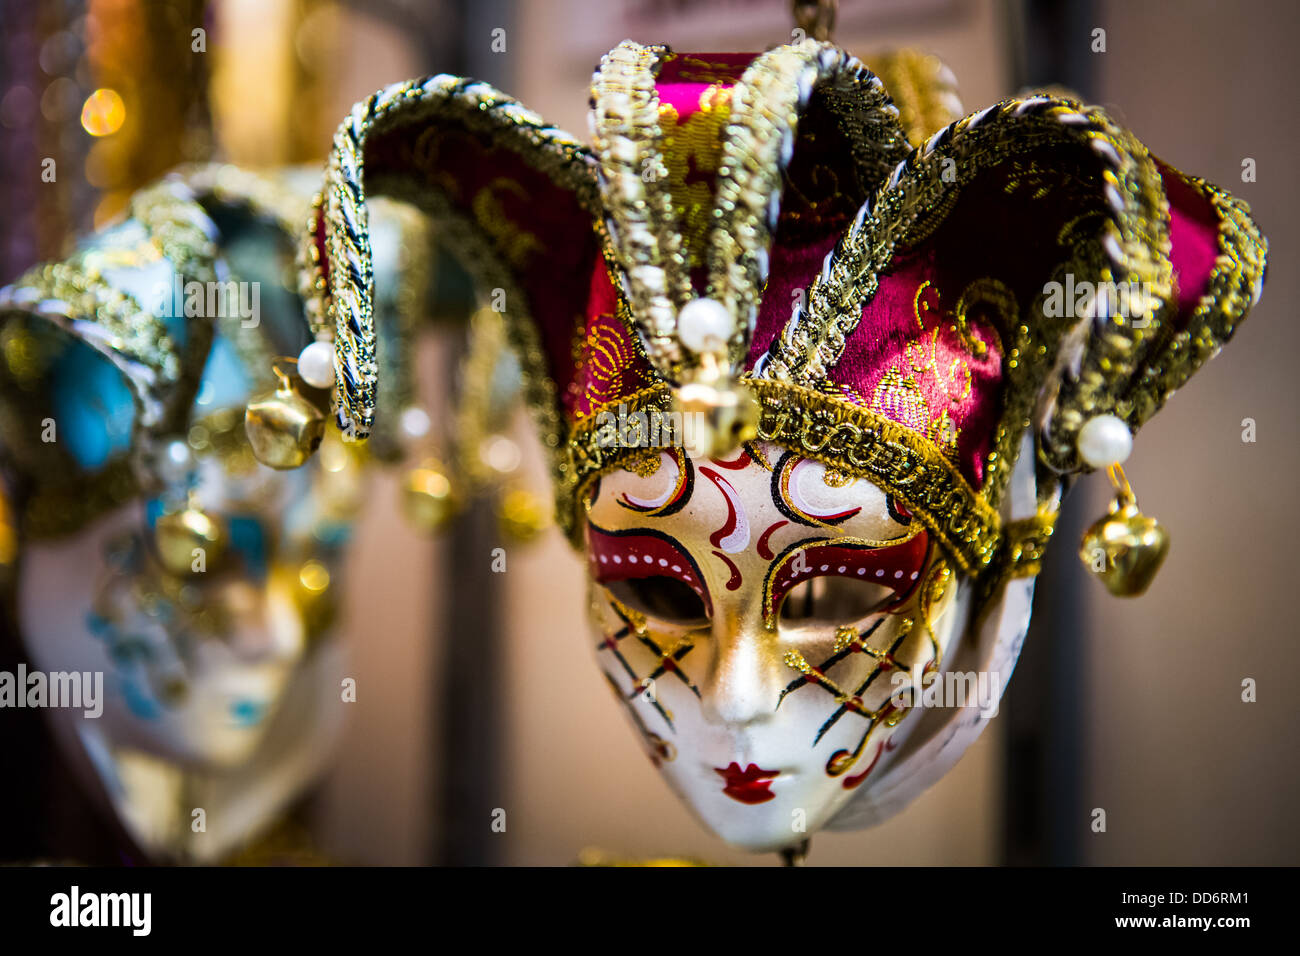 Carnival mask from Venice Stock Photo